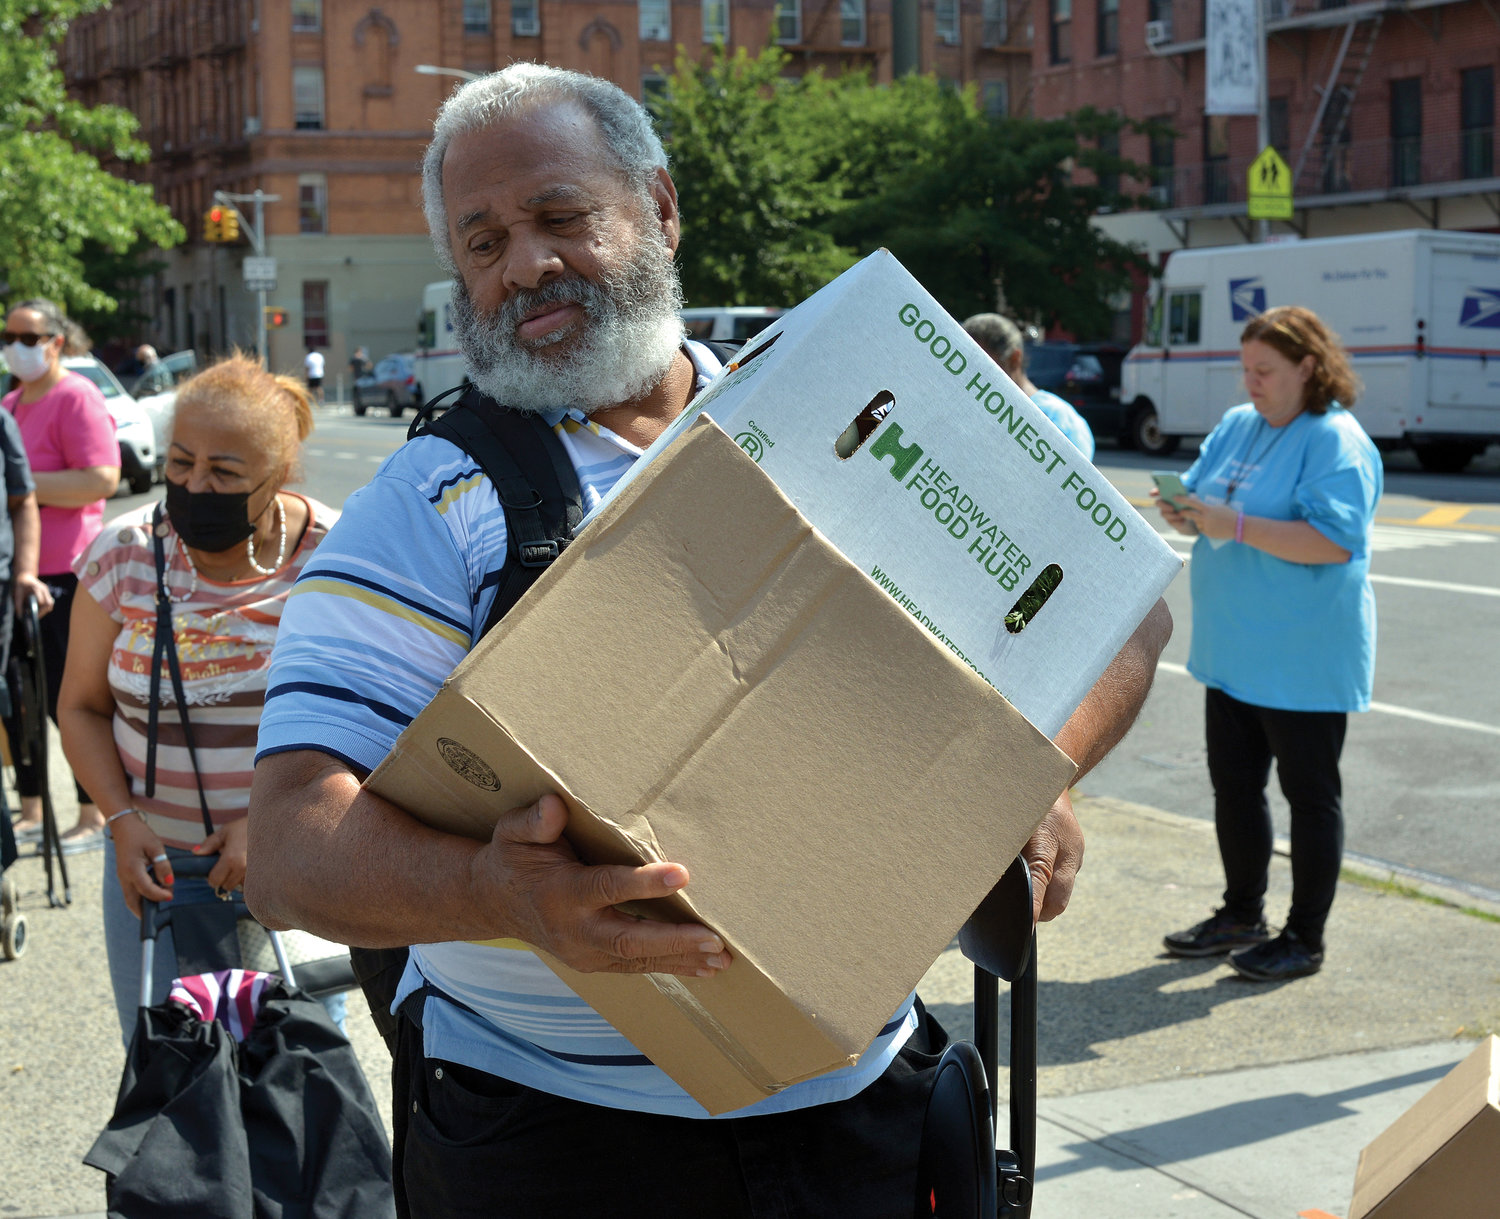 Archdiocesan Catholic Charities distributed 200 boxes of dry goods, dairy and produce July 15 to local families in need at St. Joseph of the Holy Family Church in Harlem.